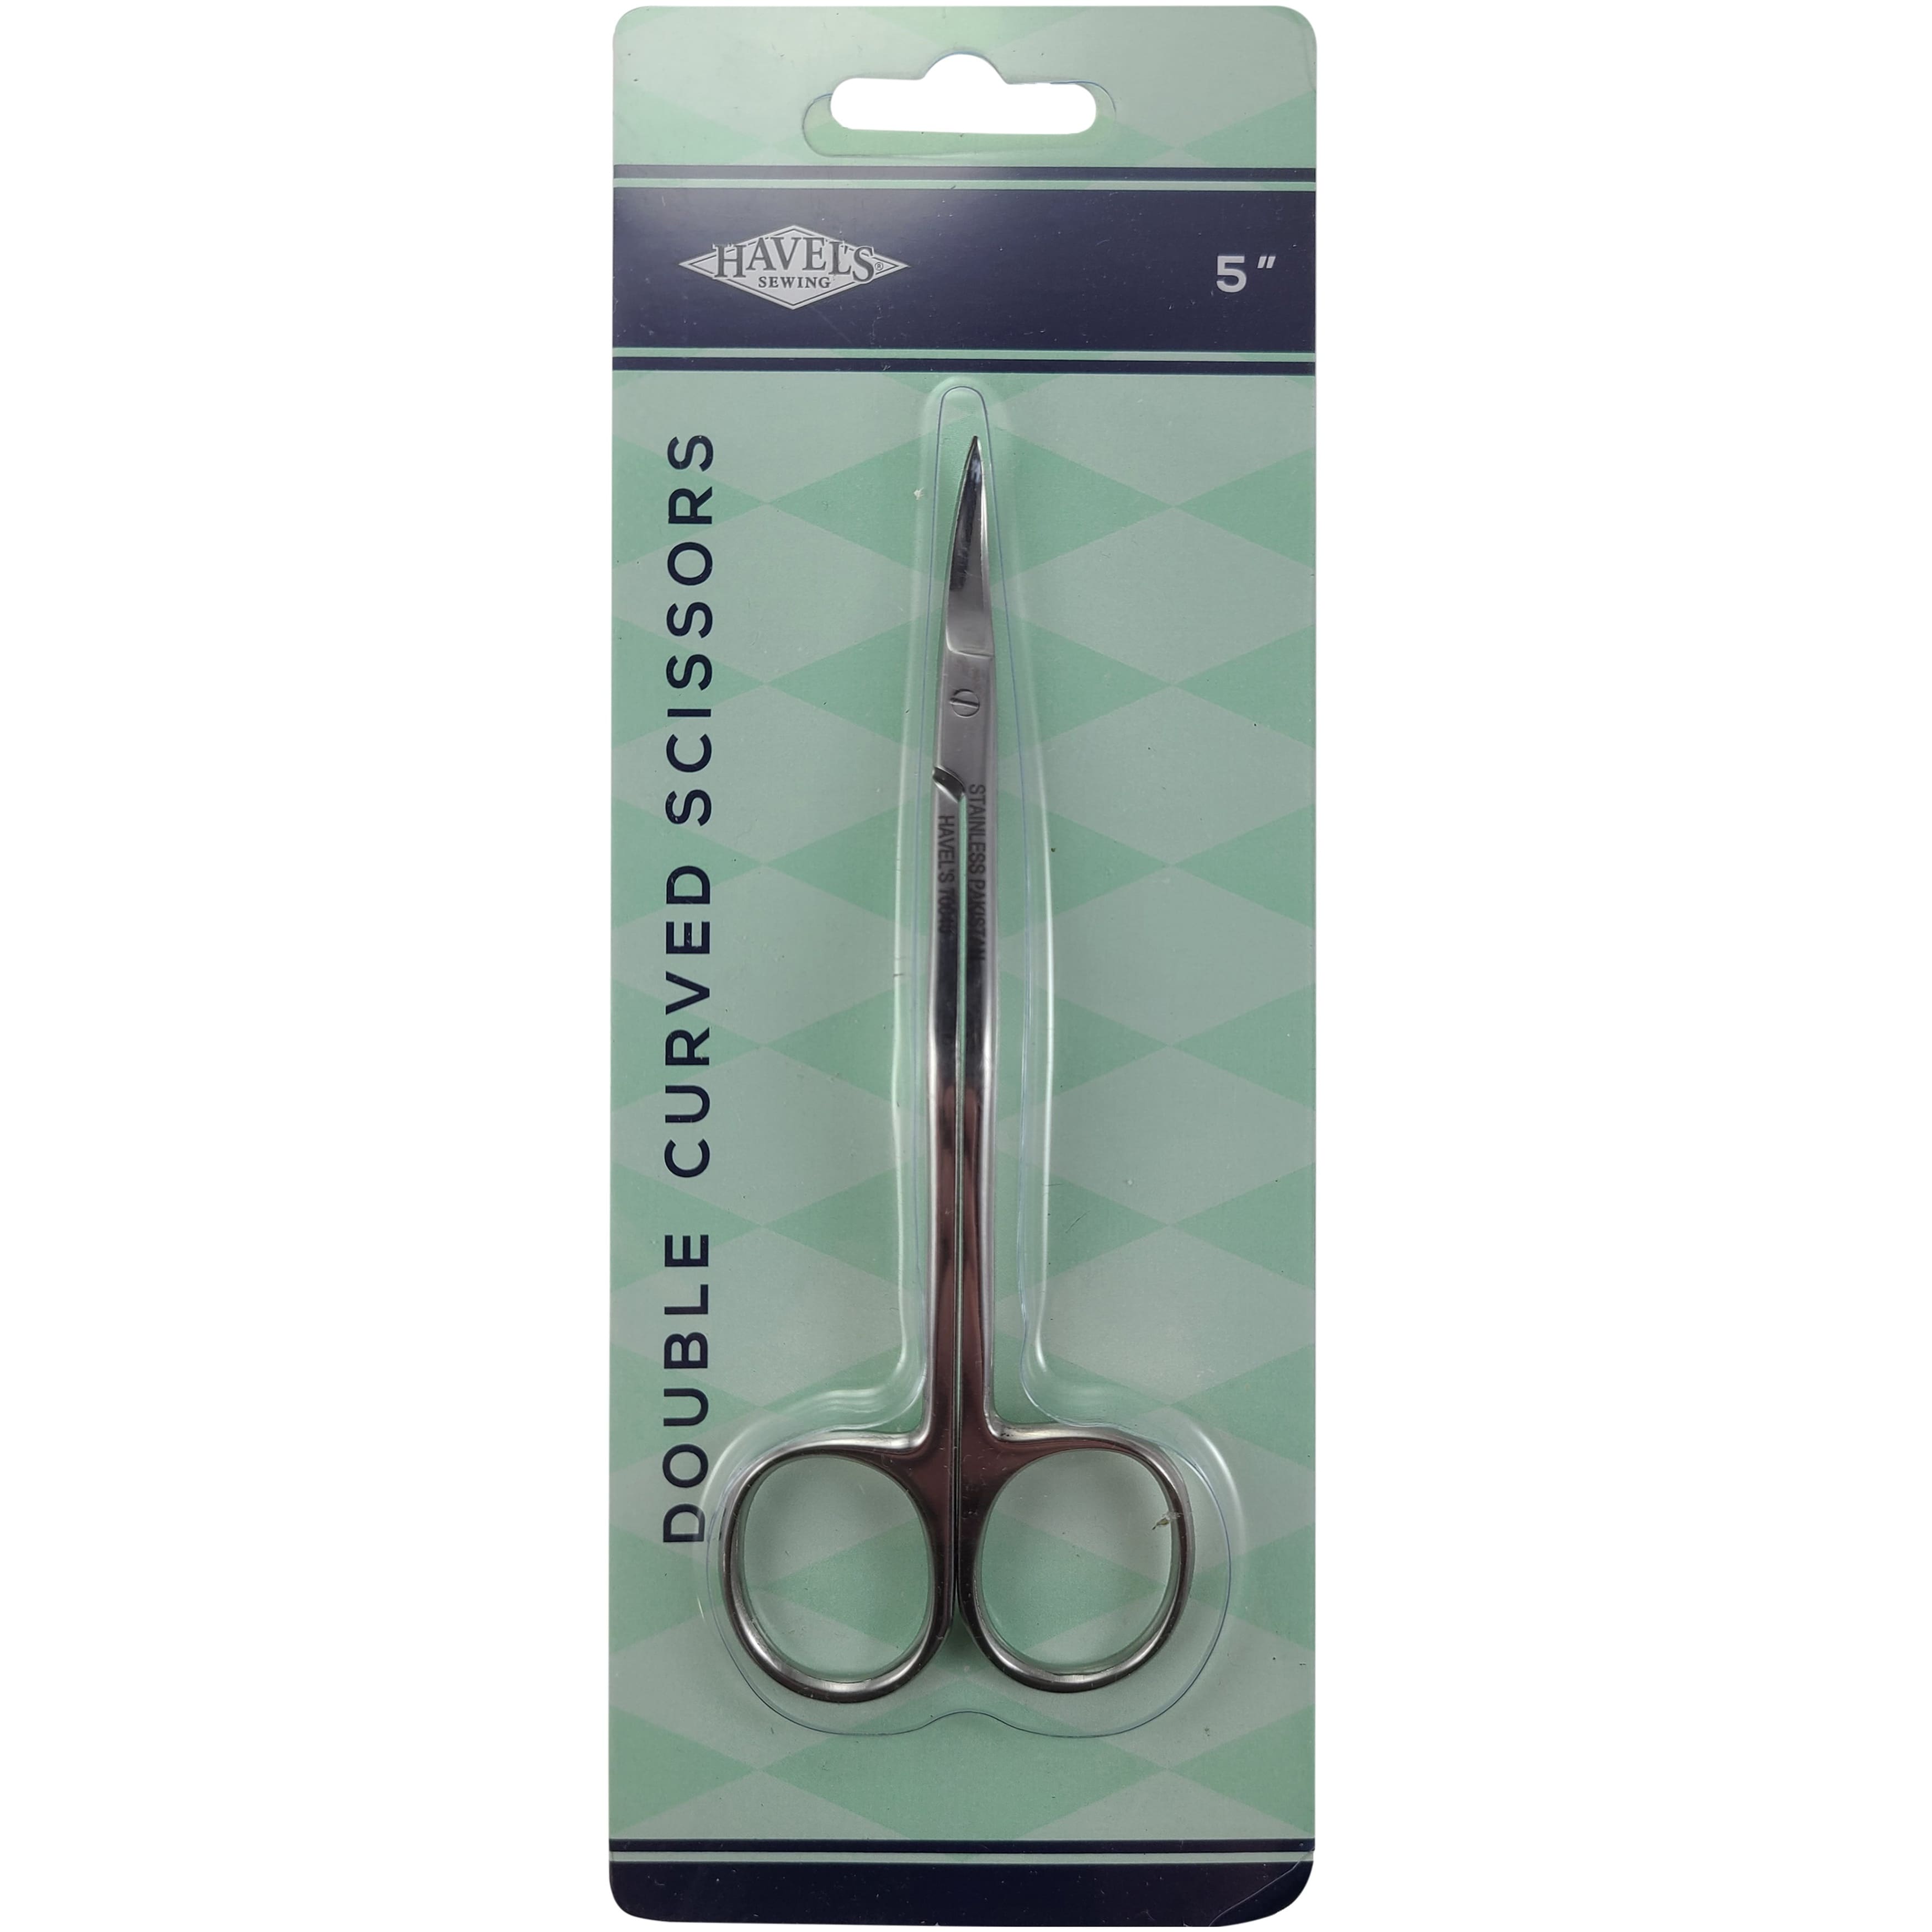 Havel's™ 5 Double-Curved Embroidery Scissors